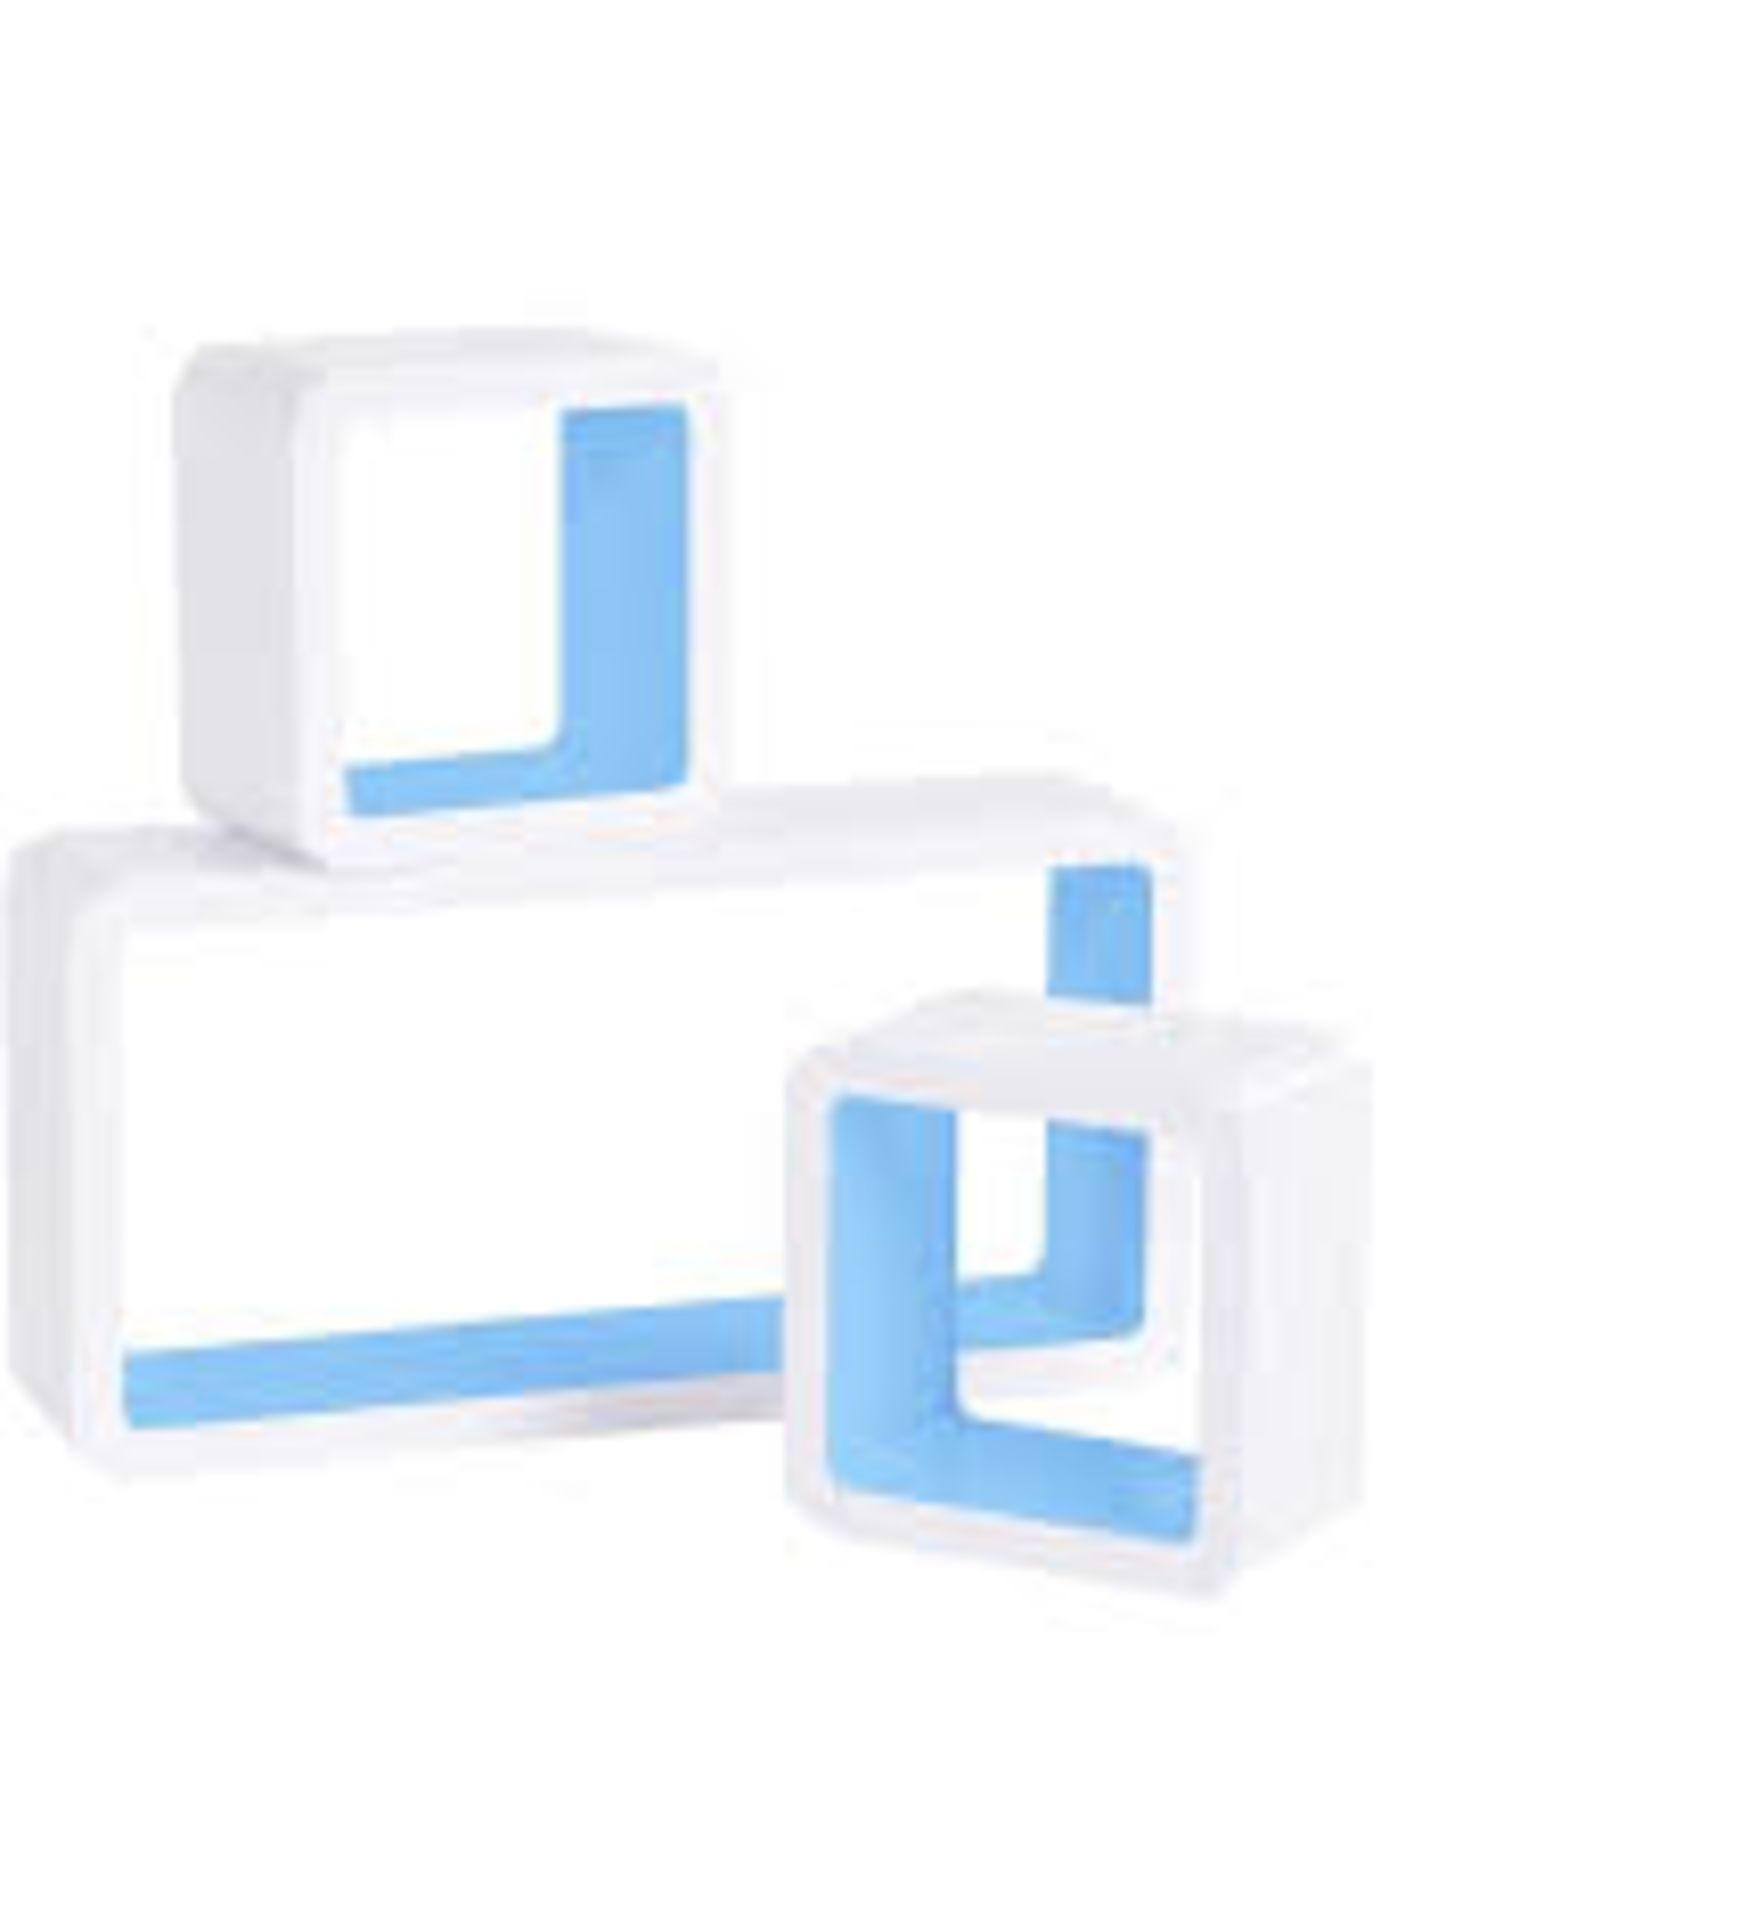 5 X NEW BOXED SETS OF 3 FLOATING WALL CUBE SHELFS - WHITE/PALE BLUE. HM-3P006W/BL. ROW 19